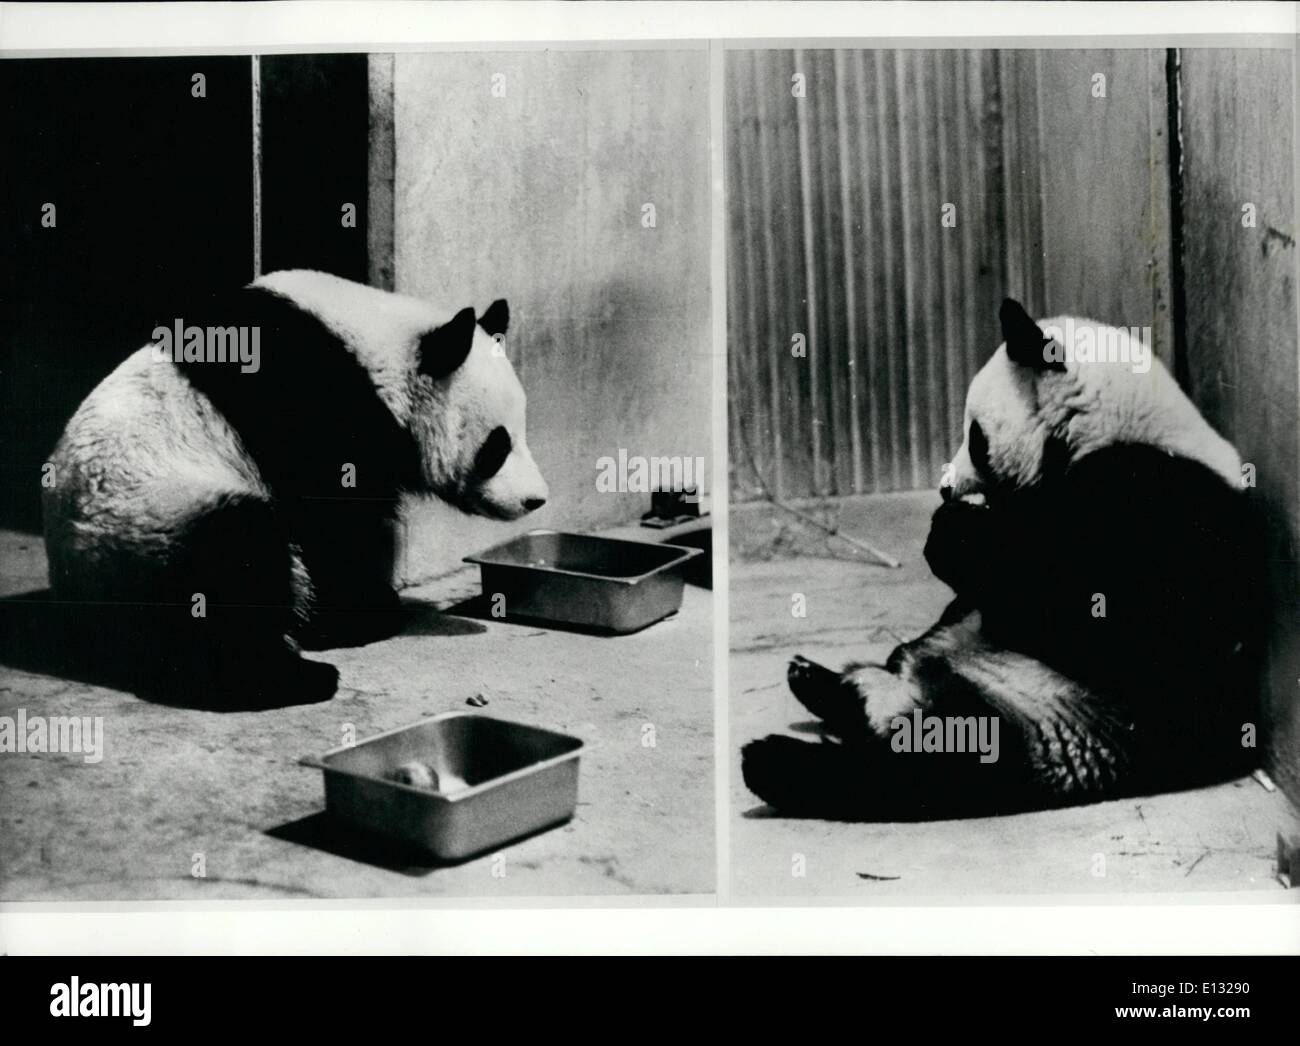 Feb. 26, 2012 - Mao's Pandas For Nixon: As A result of President Nixon's visit to China, a pair of pandas were given by the Chinese government, in honour of the visit. Hising-Hisng, a male (left) and Ling-Ling, a female, are creating great interest at the Washington Zoo. Stock Photo